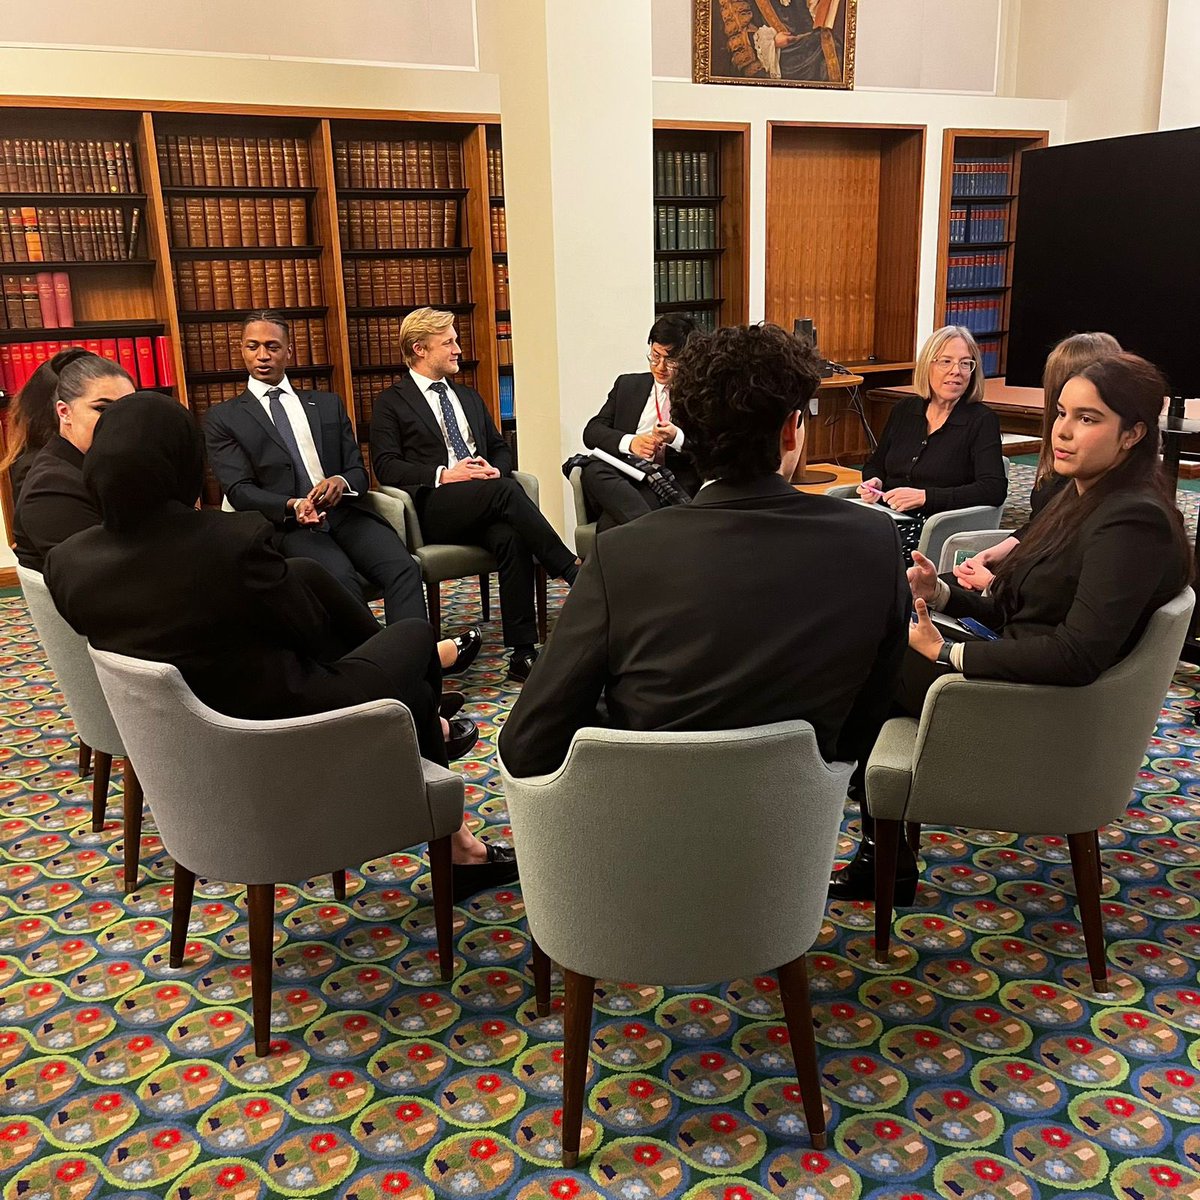 @BridgeTheBar Thursday saw our interns continue to watch today’s hearings, which they discussed afterwards with our Judicial Assistants, they had time to work on their presentations for tomorrow before reflecting on their week with CEO Vicky and Head JA Rebecca.